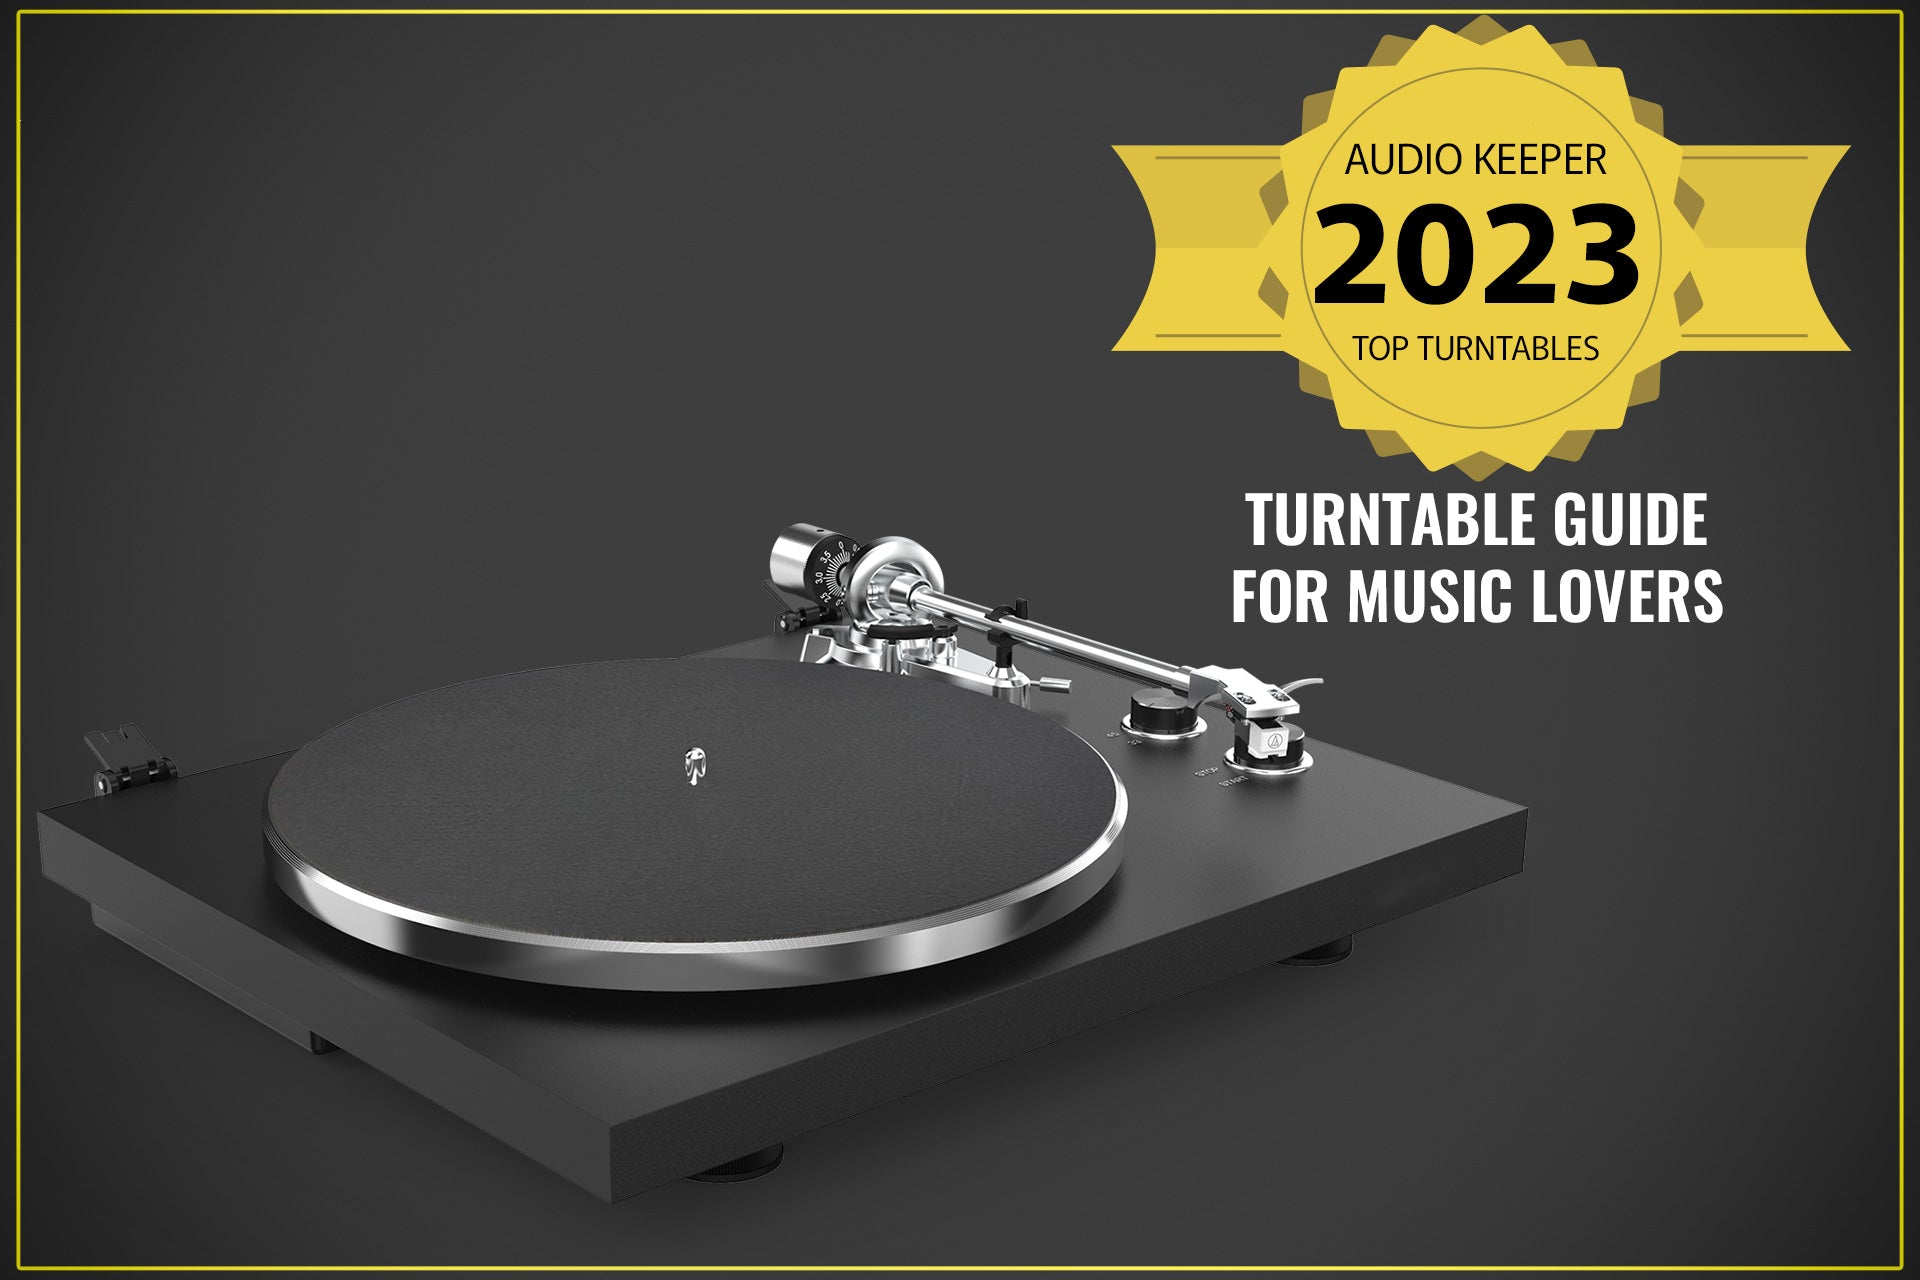 Turntable Buying Guide for Music Lovers